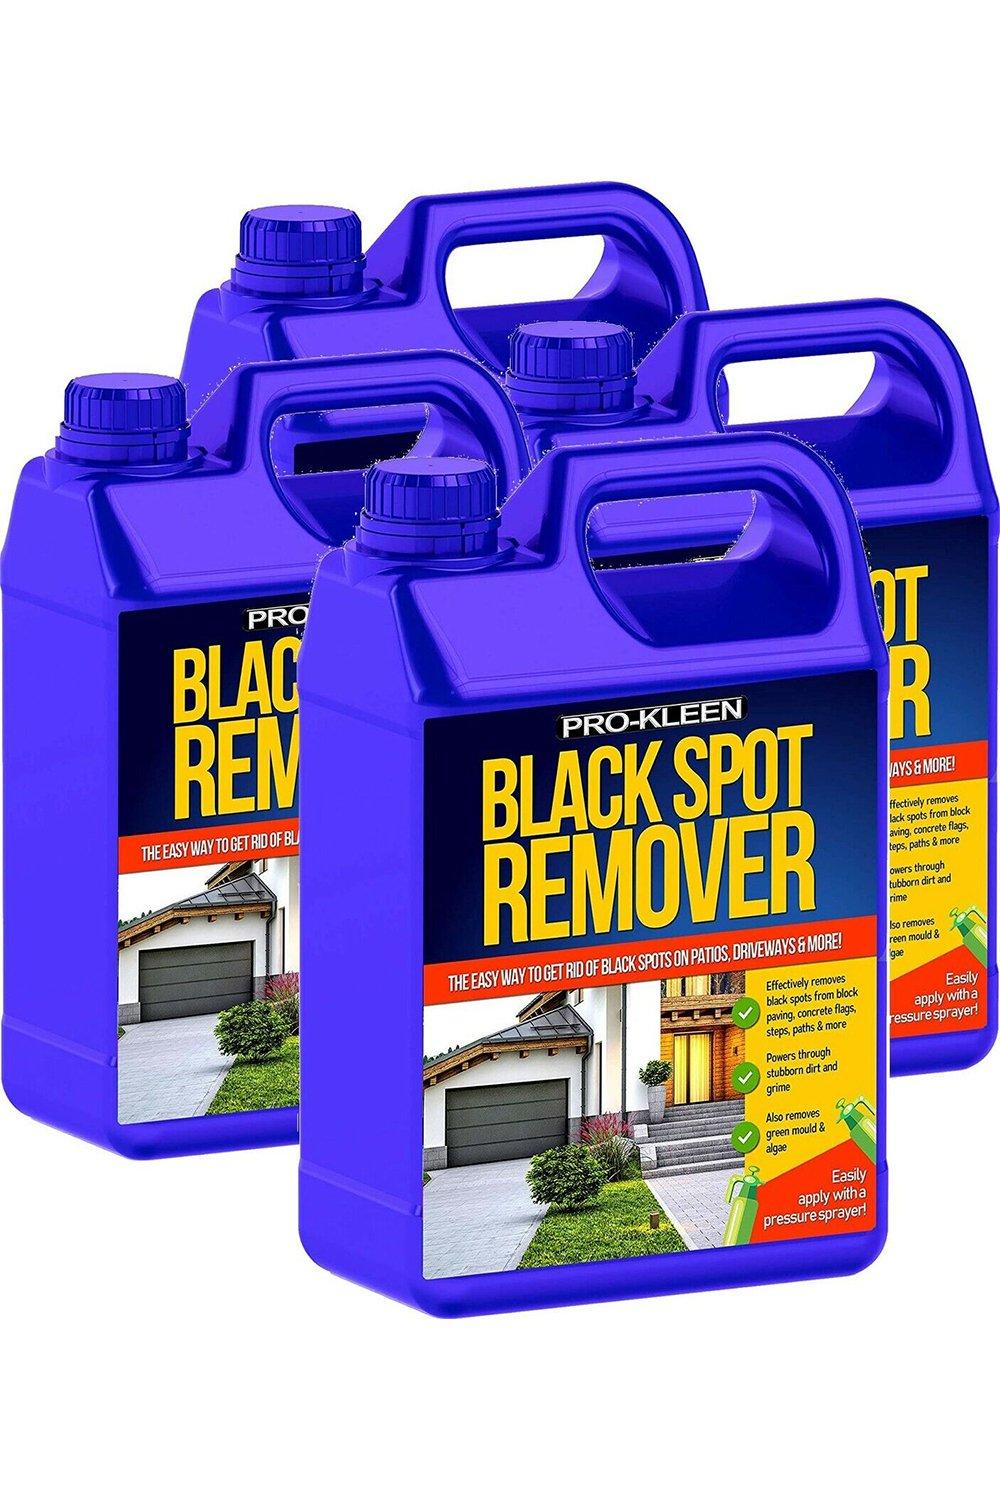 Powerful Black Spot Remover Patio Cleaner 4 x 5L